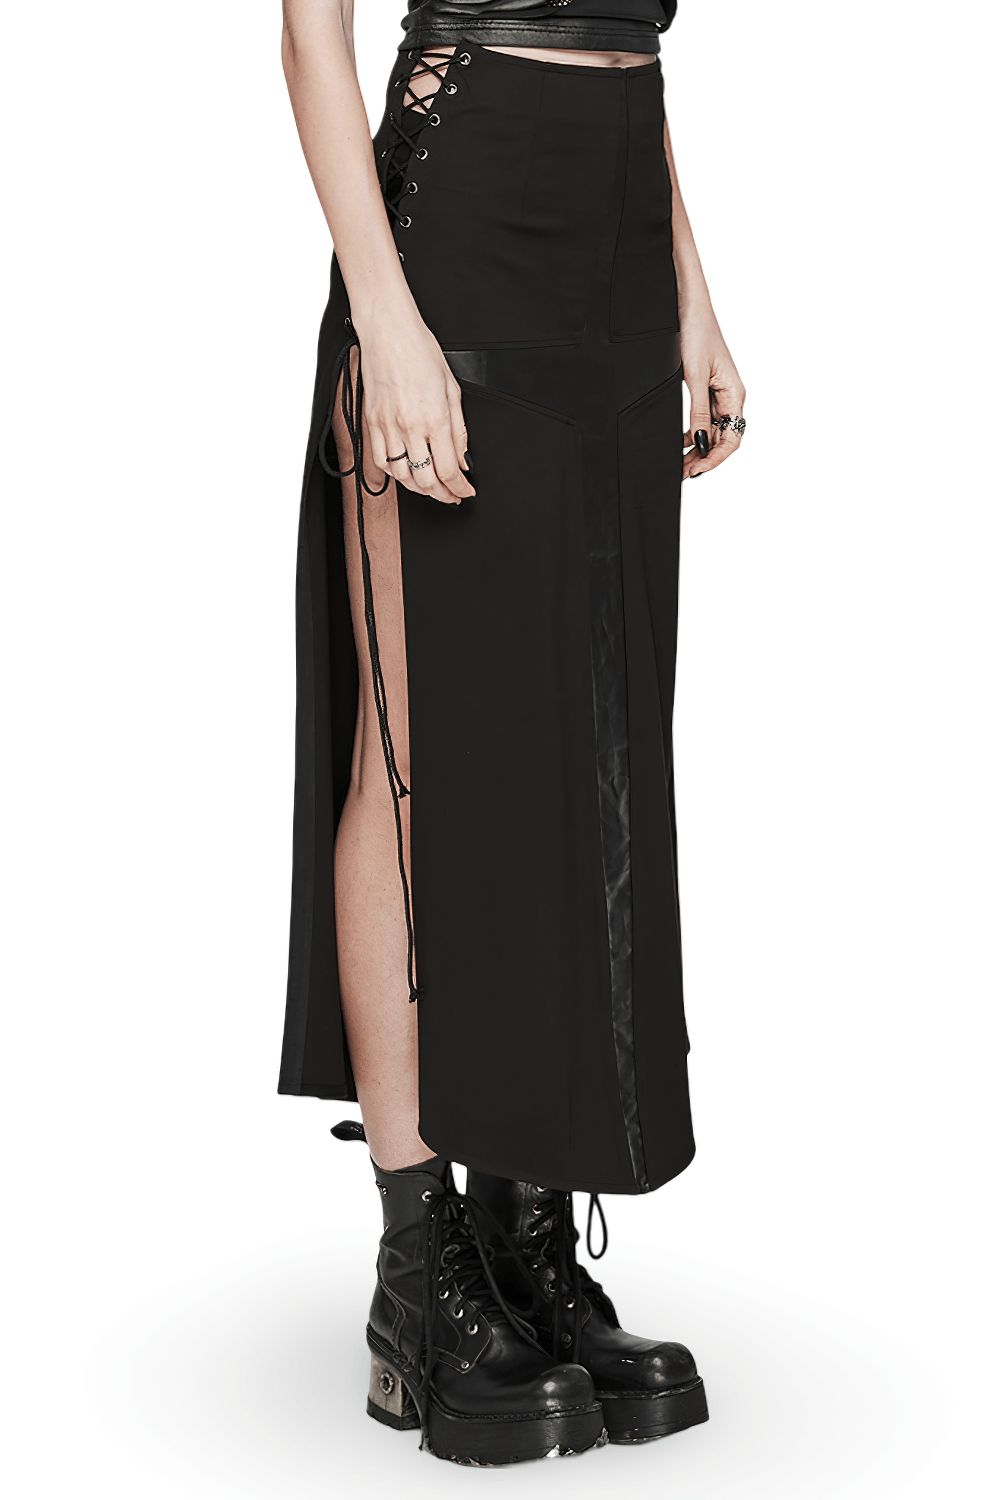 Edgy Punk Skirt with Eyelet Drawstrings and Cross Splice